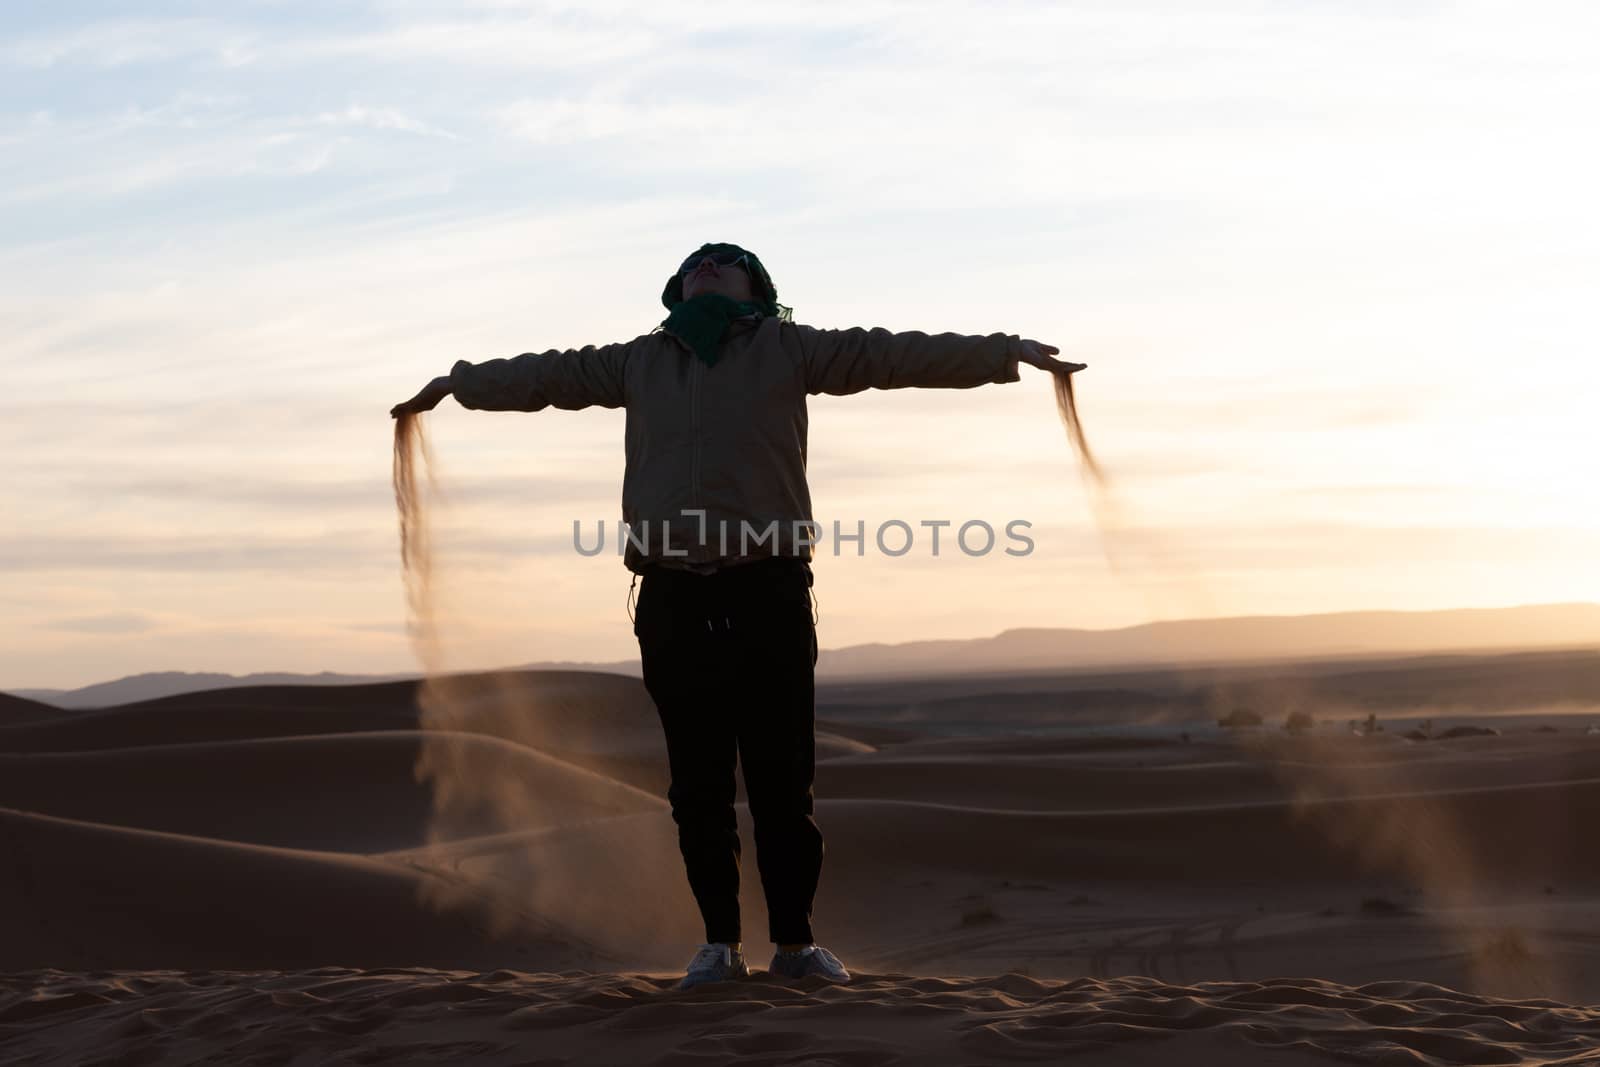 Silhouette of person jumping and throwing sand in the Sahara against a sunset by kgboxford